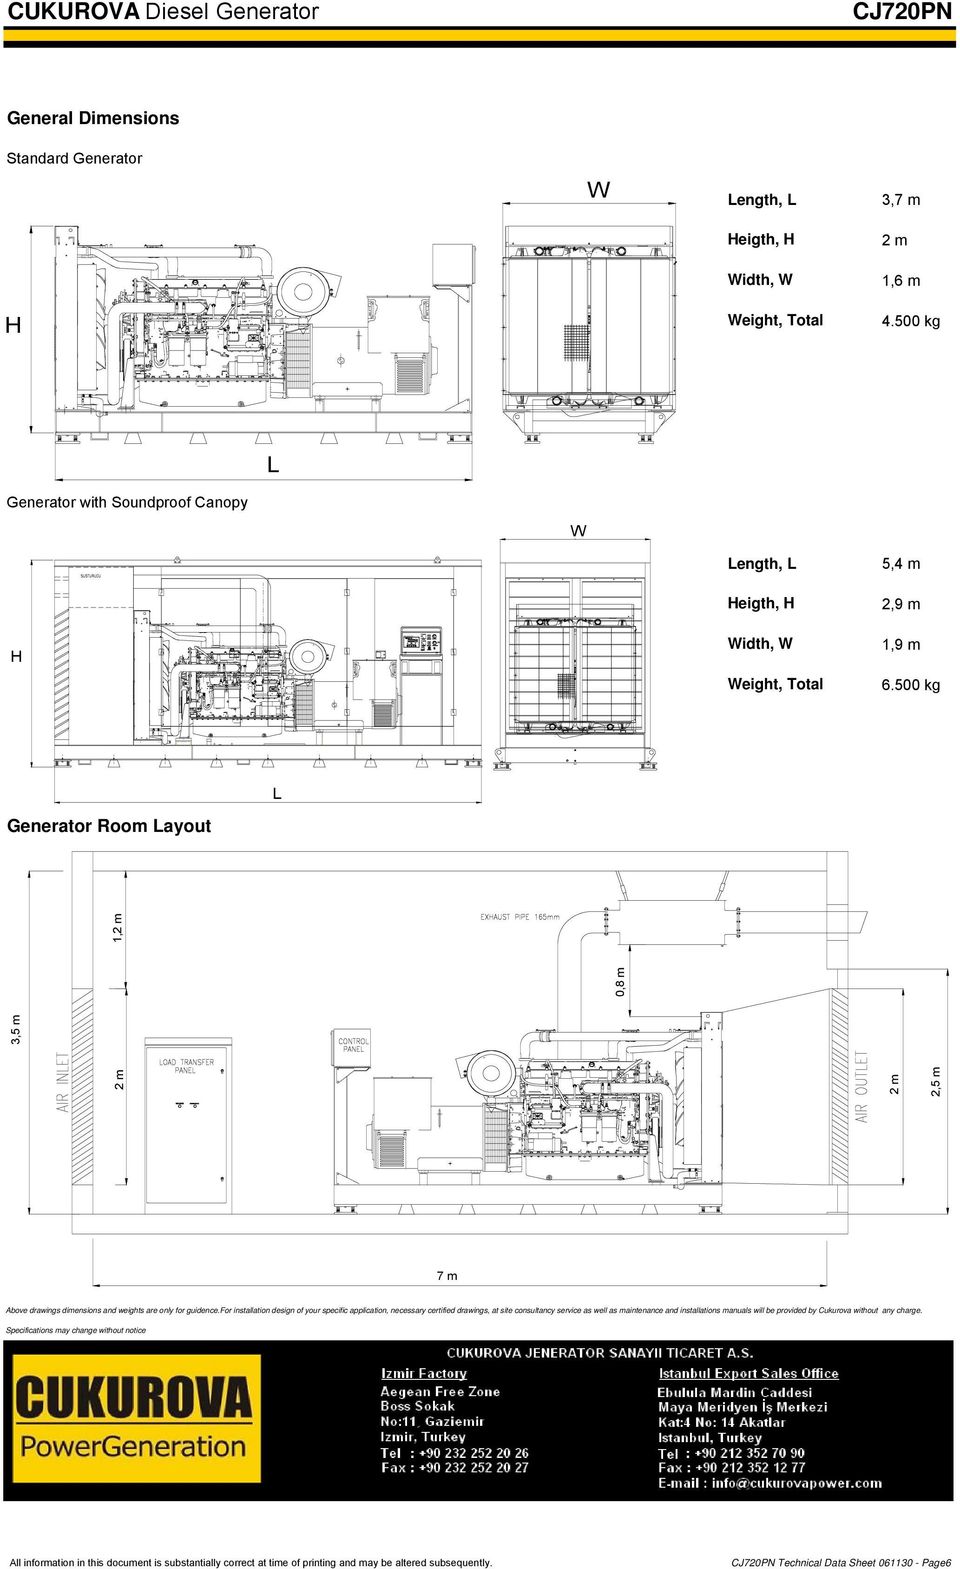 500 kg L Generator Room Layout 3,5 m 2 m 1,2 m 0,8 m 2 m 2,5 m 7 m Above drawings dimensions and weights are only for guidence.